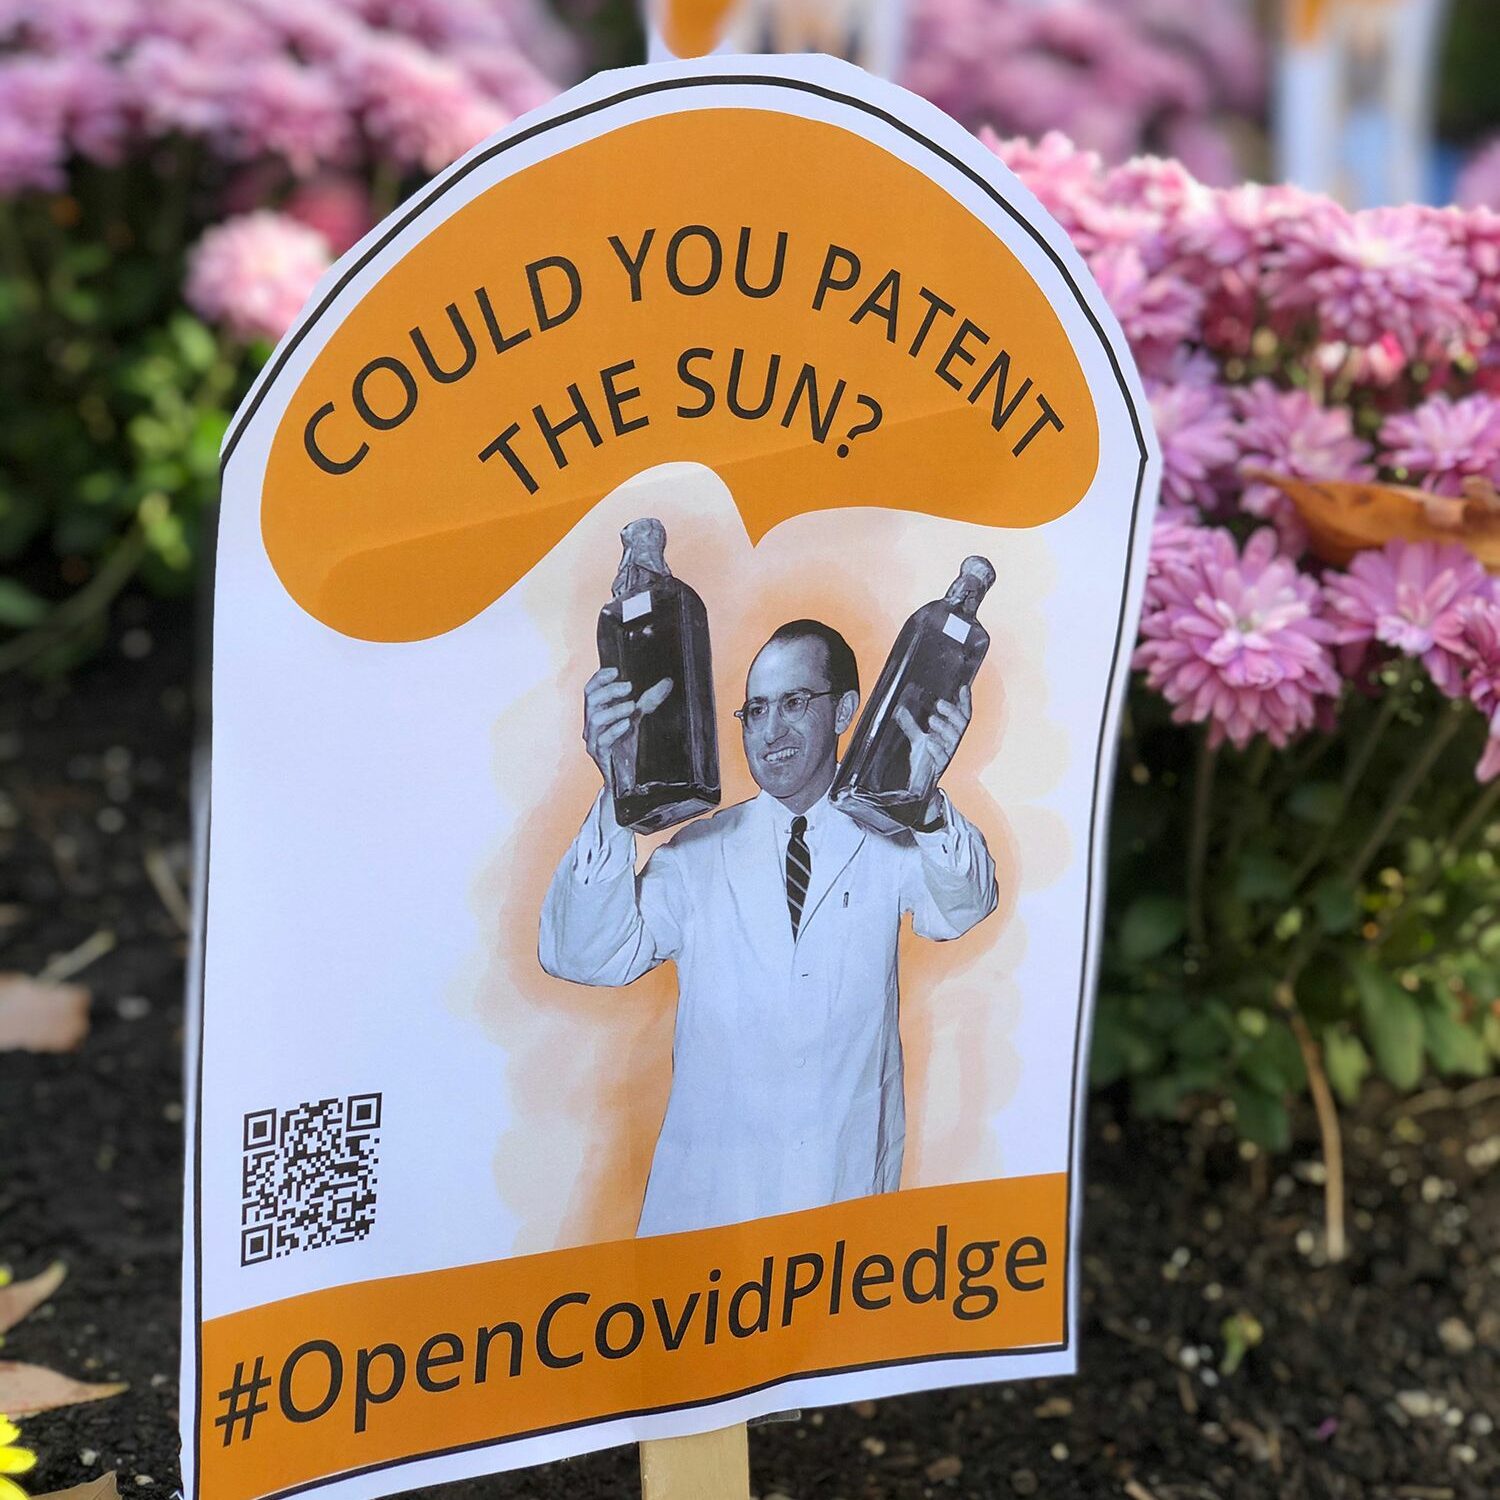 A playful tombstone with the ghost of Jonas Salk asking, "could you patent the sun?" #OpenCovidPledge appears along the base.